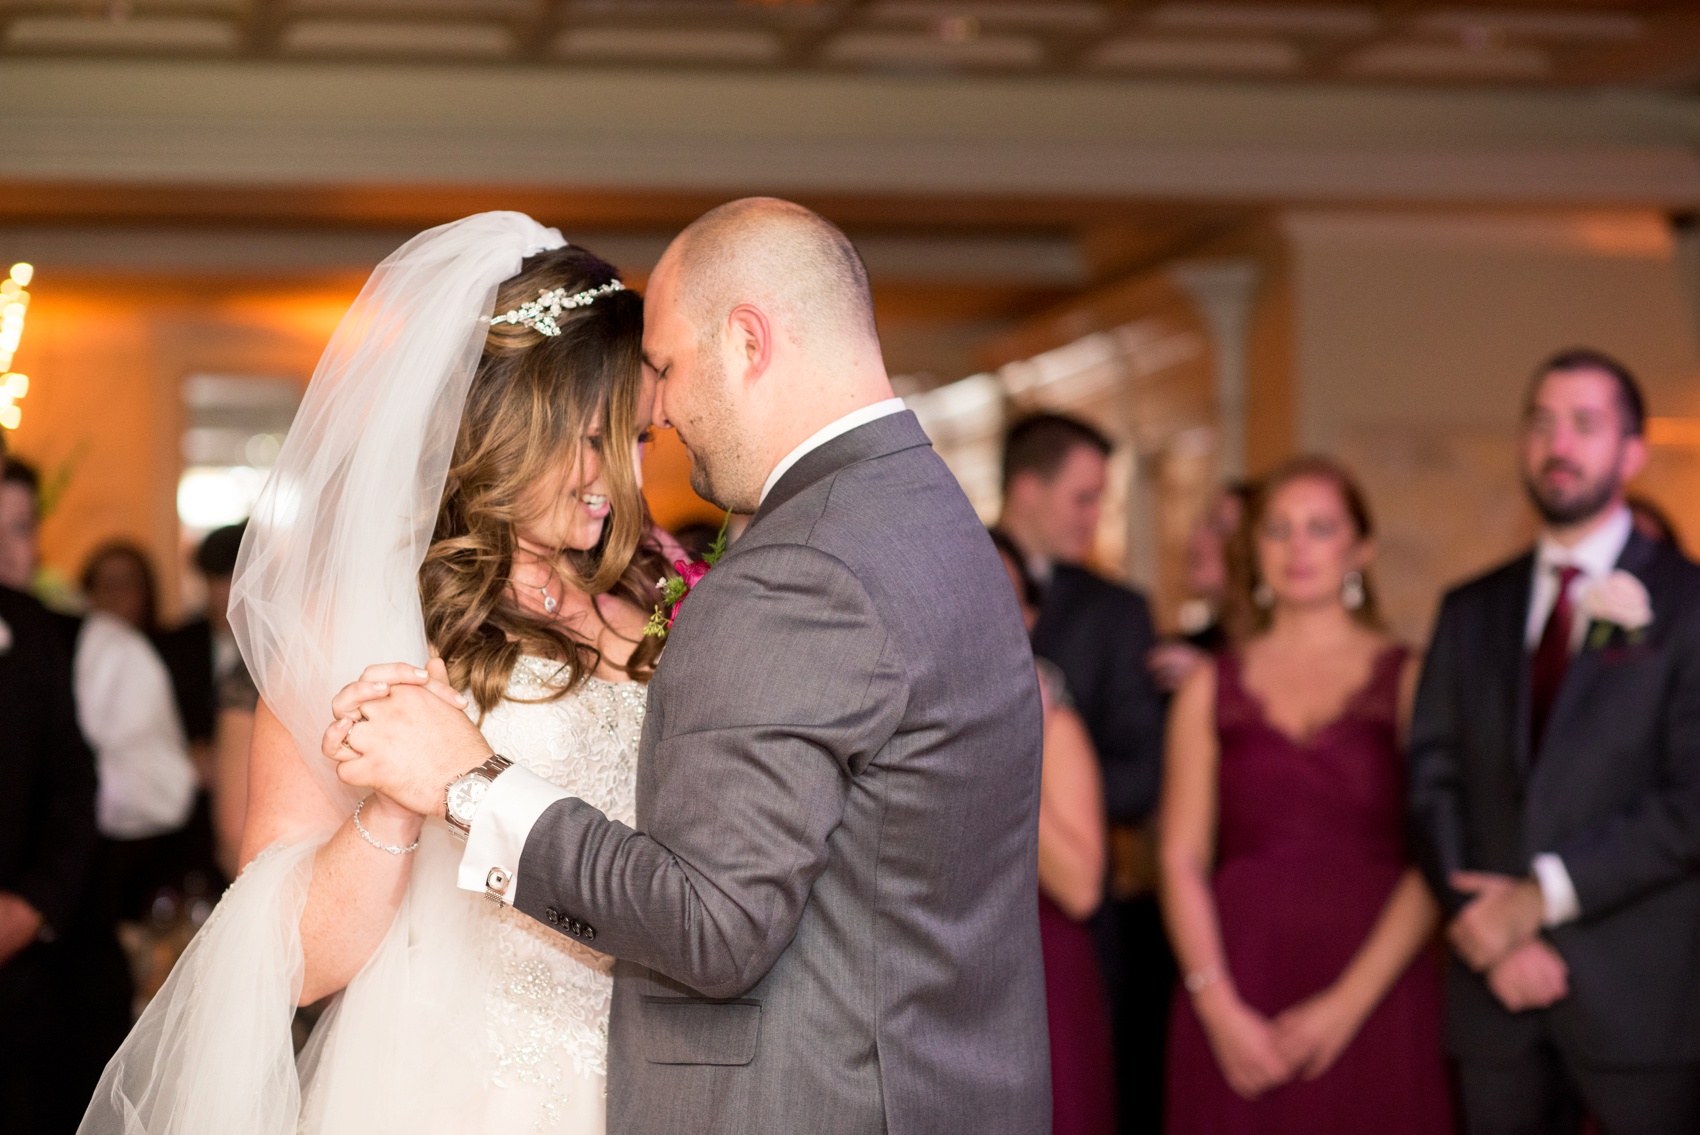 Olde Mill Inn wedding ceremony by Mikkel Paige Photography, NYC and Raleigh wedding photographer.